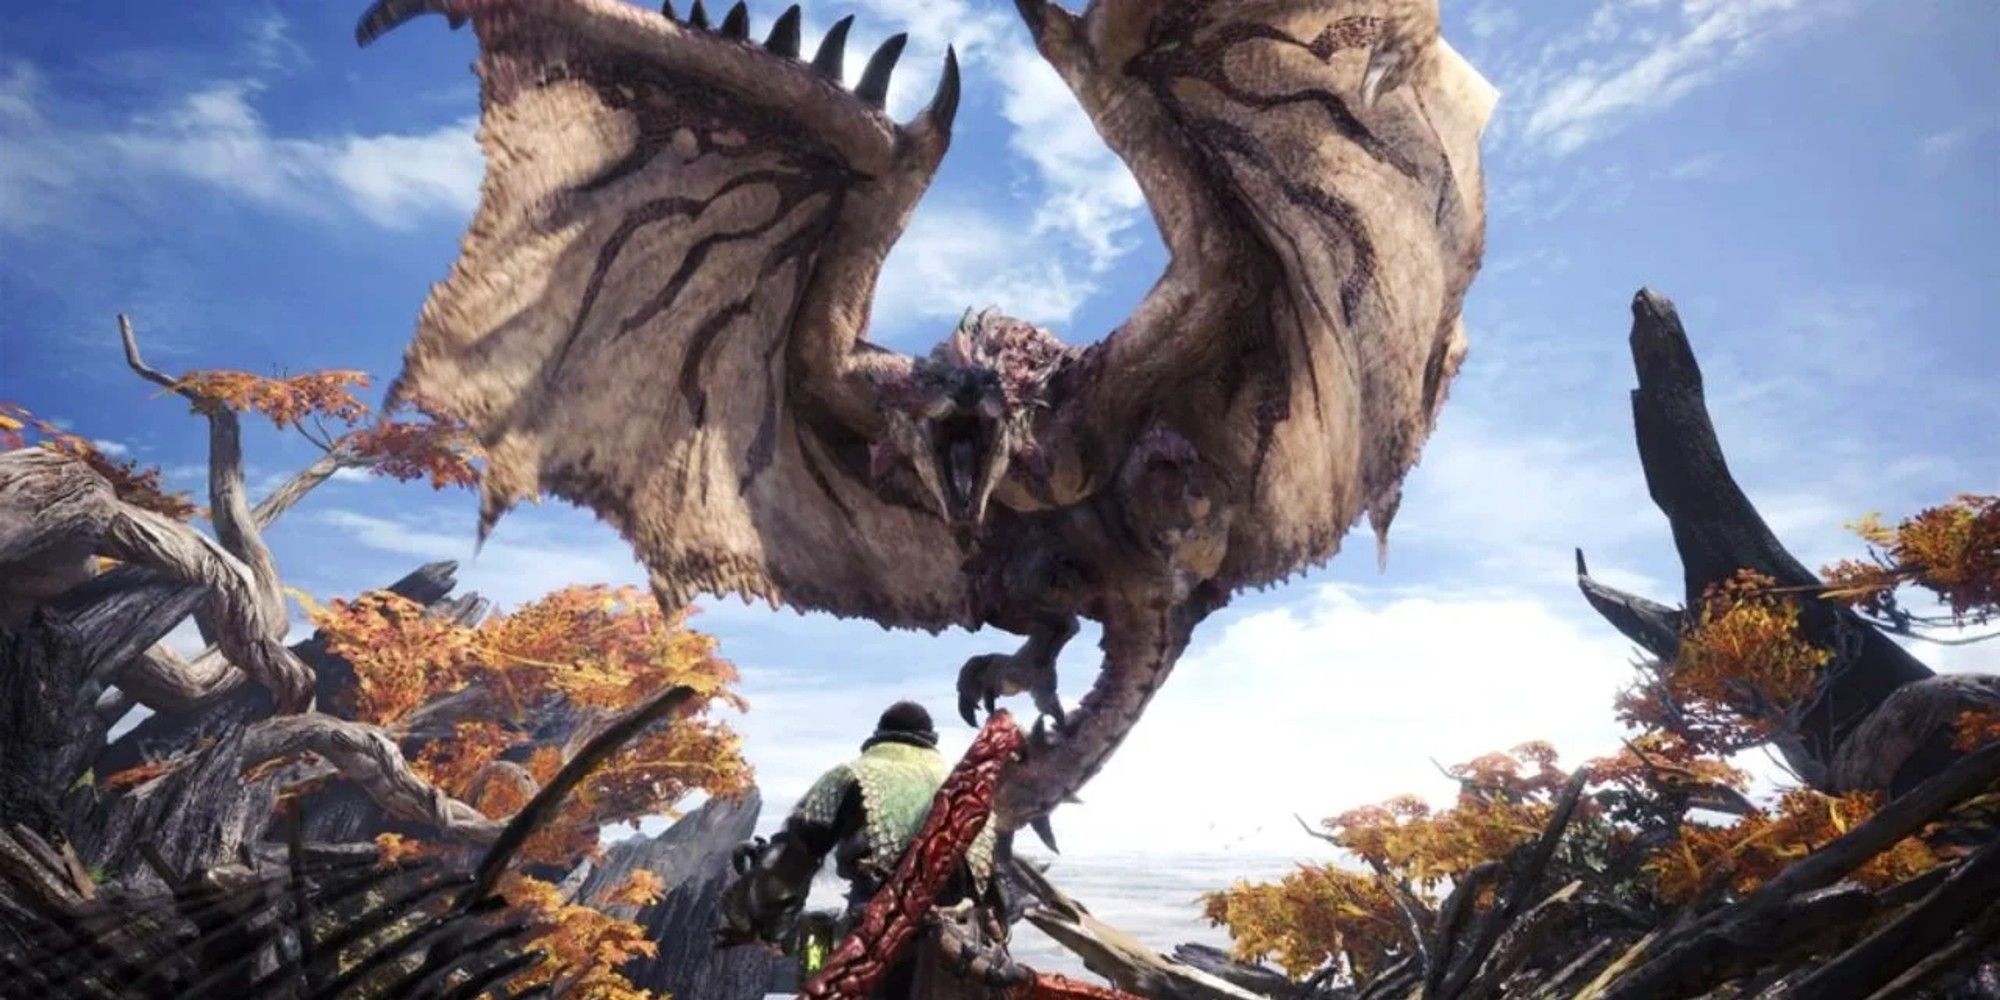 Rathalos spreads his wings and roars in Monster Hunter World